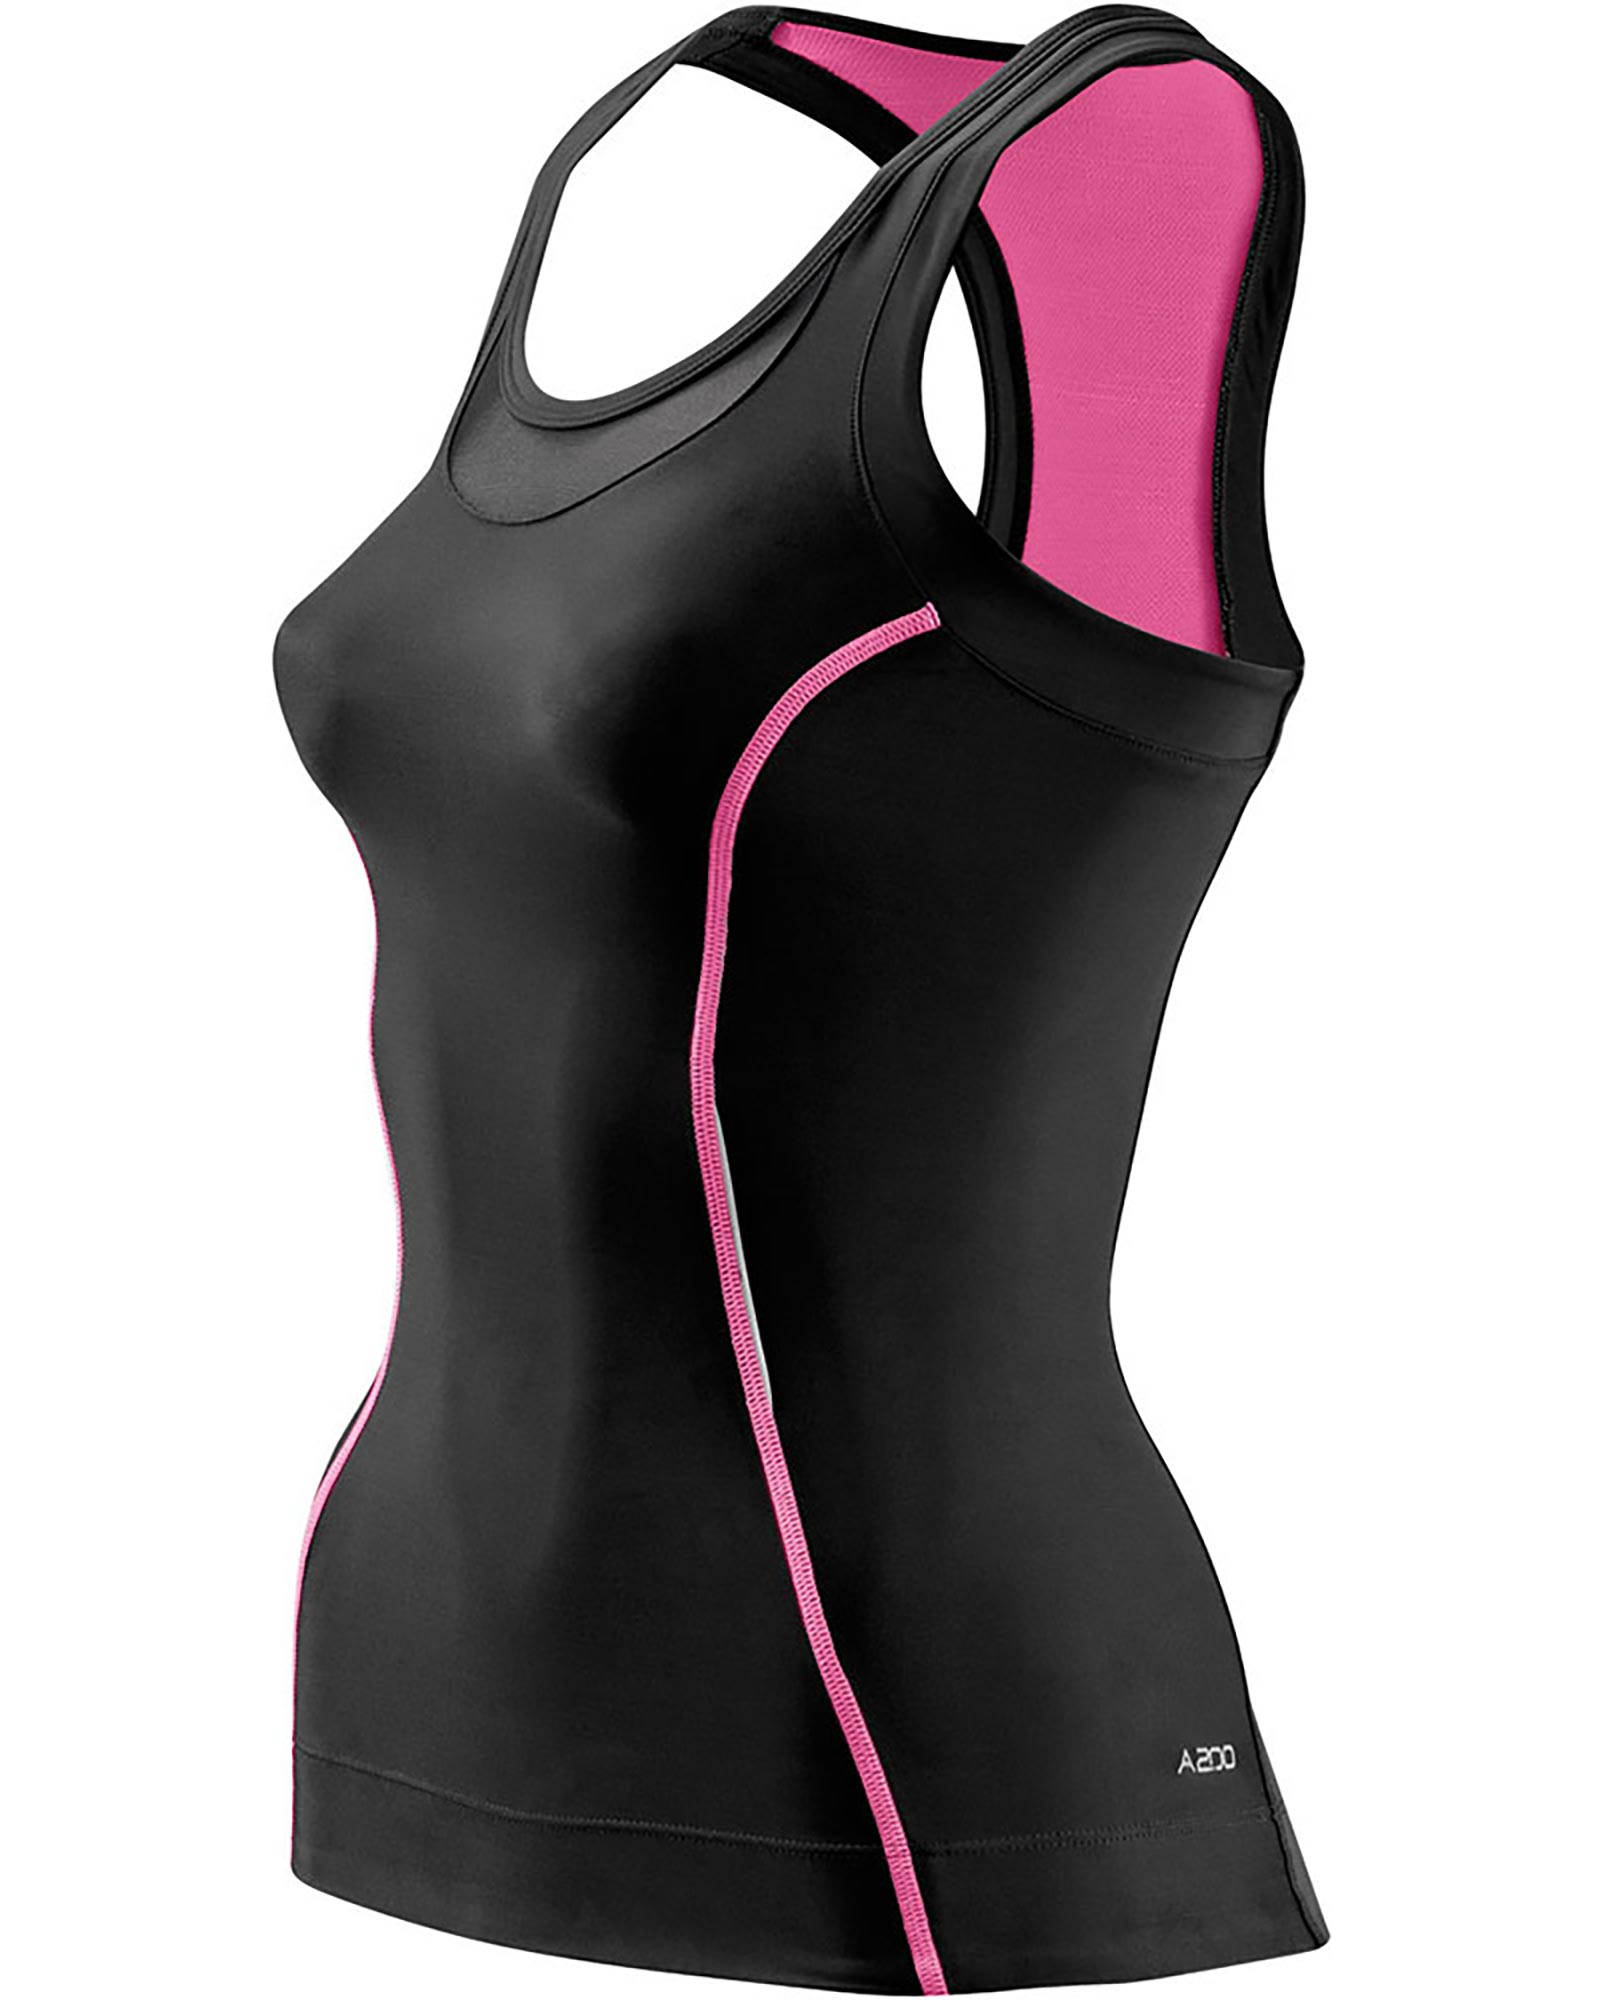 Skins A200 Racer Back Womens Top